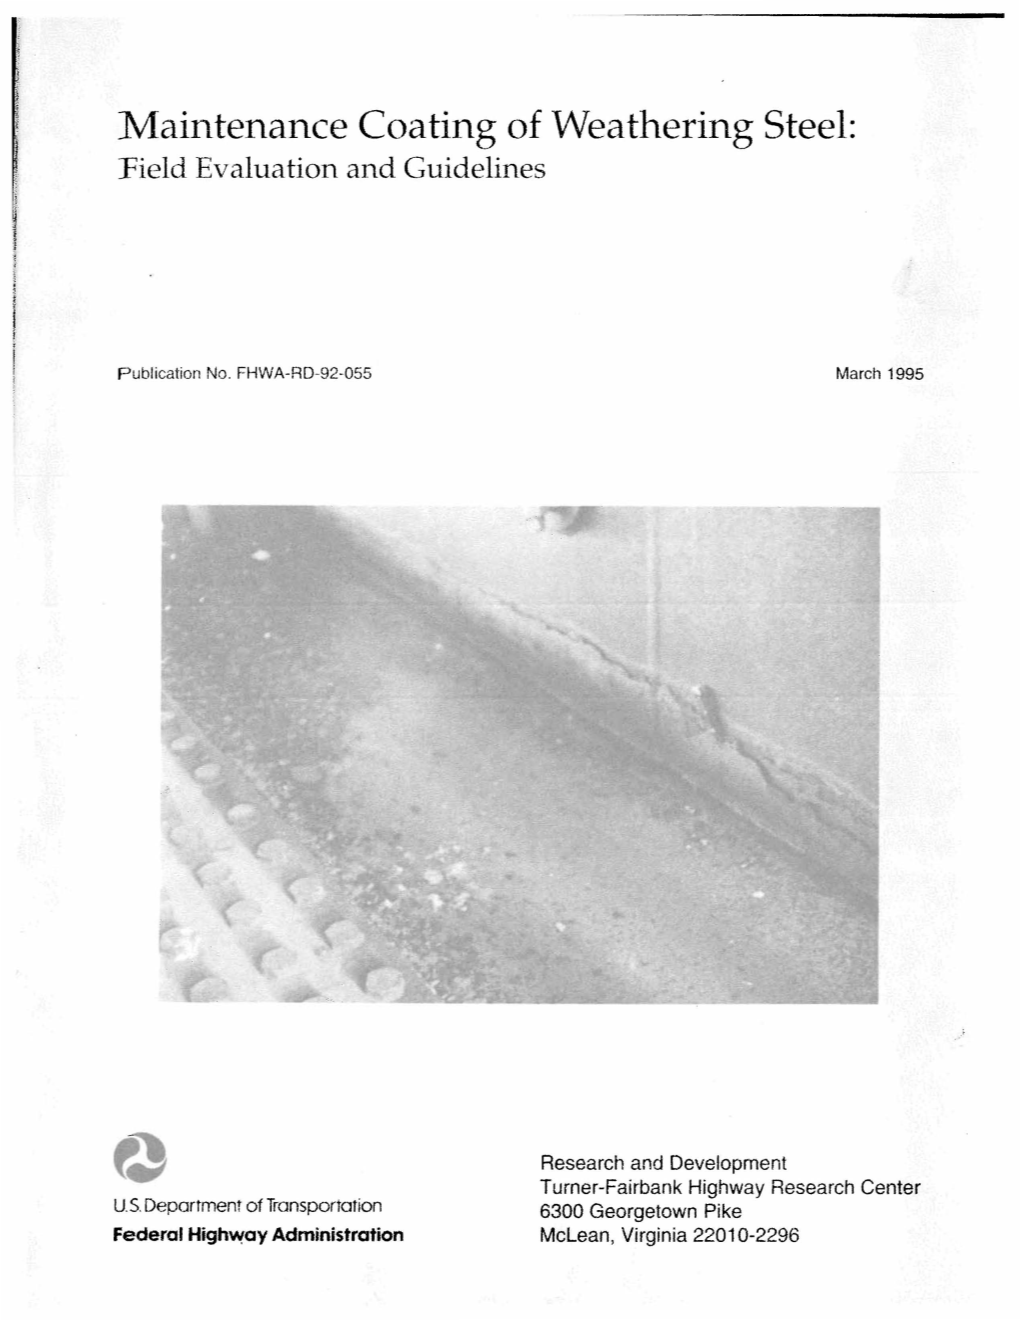 Maintenance Coating of Weathering Steel: Field Evaluation and Guidelines